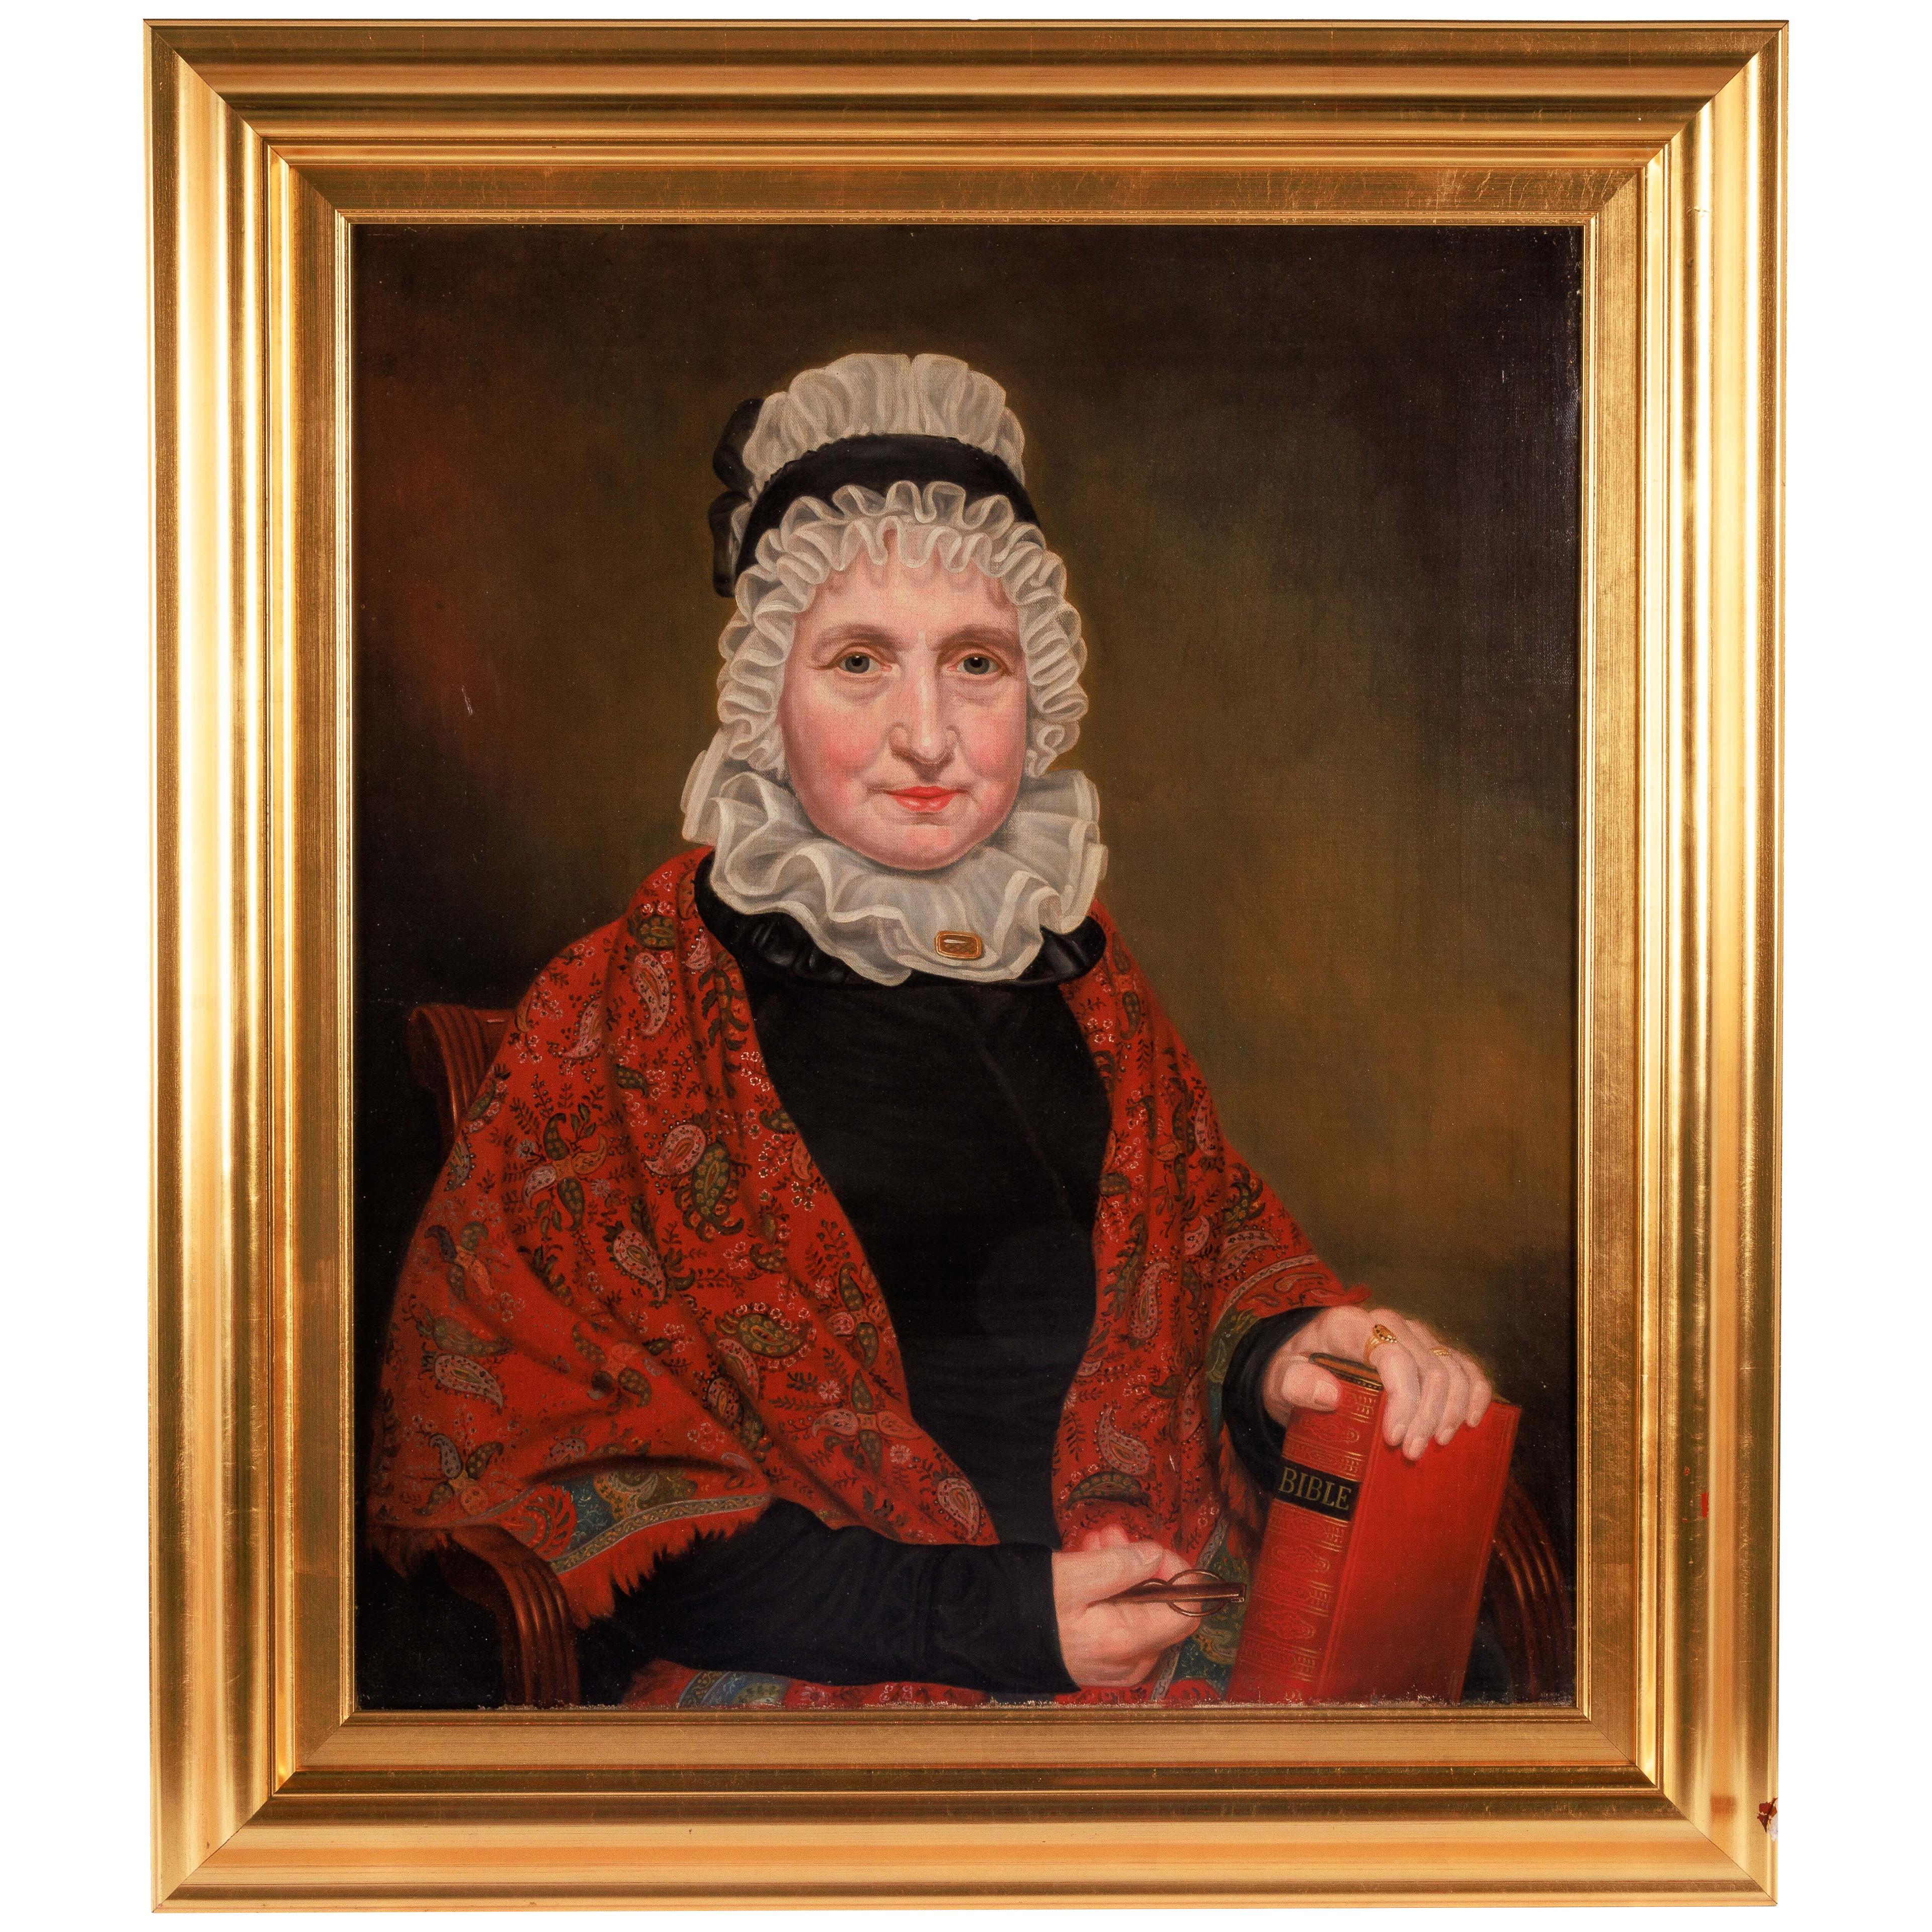 (American School, C. 1830) An Exceptional Quality Portrait "A Lady With Bible"